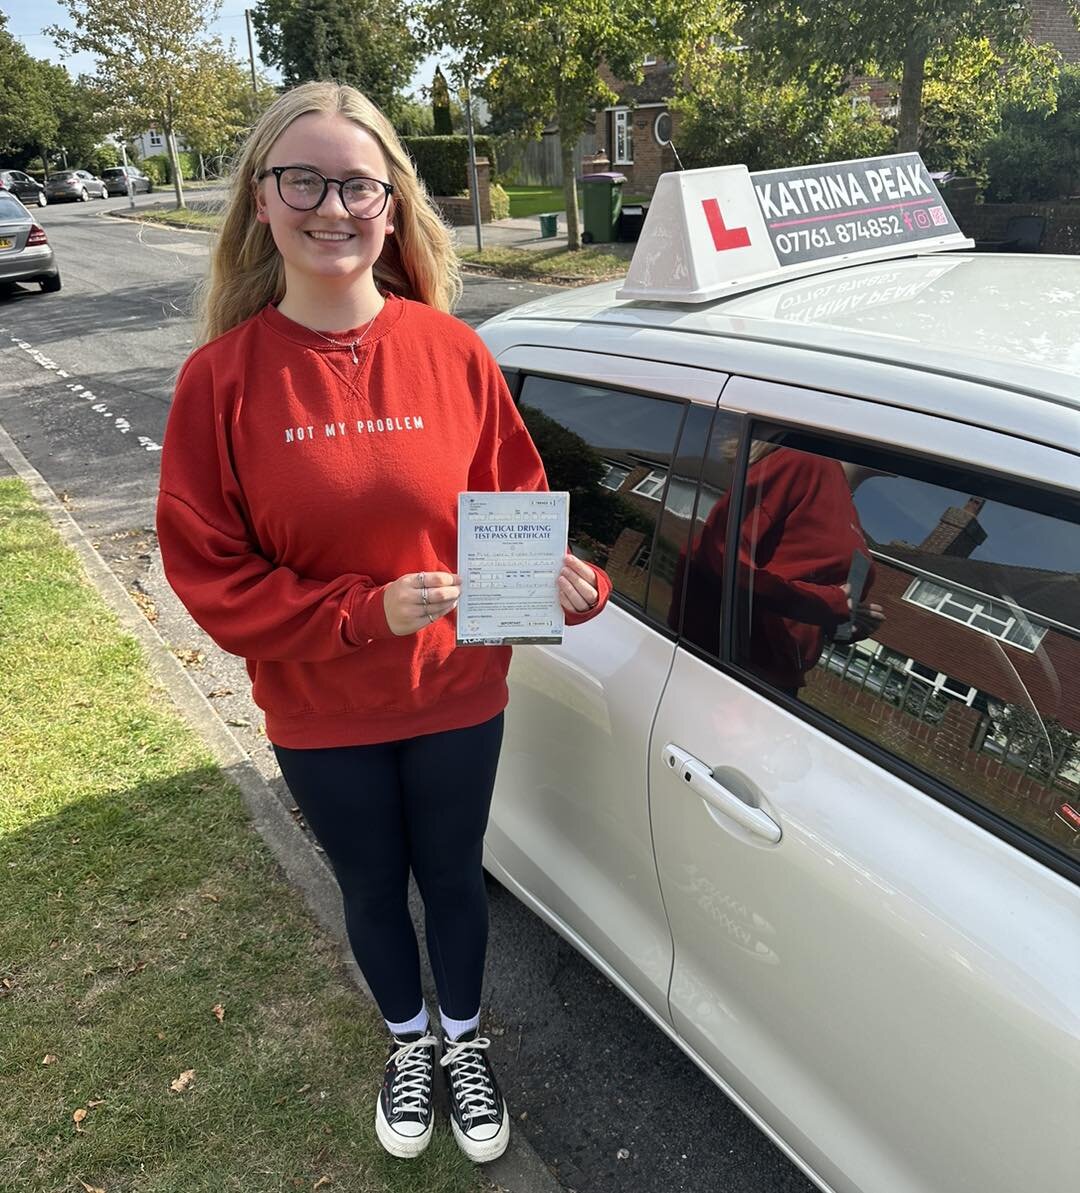 Huge congratulations to Izzy on a brilliant drive resulting in her first time driving test pass! 🥳🎉 Well done Izzy, I&rsquo;ve really enjoyed your lessons it&rsquo;s been a pleasure getting to know you! Wishing you all the best, give me a wave on t